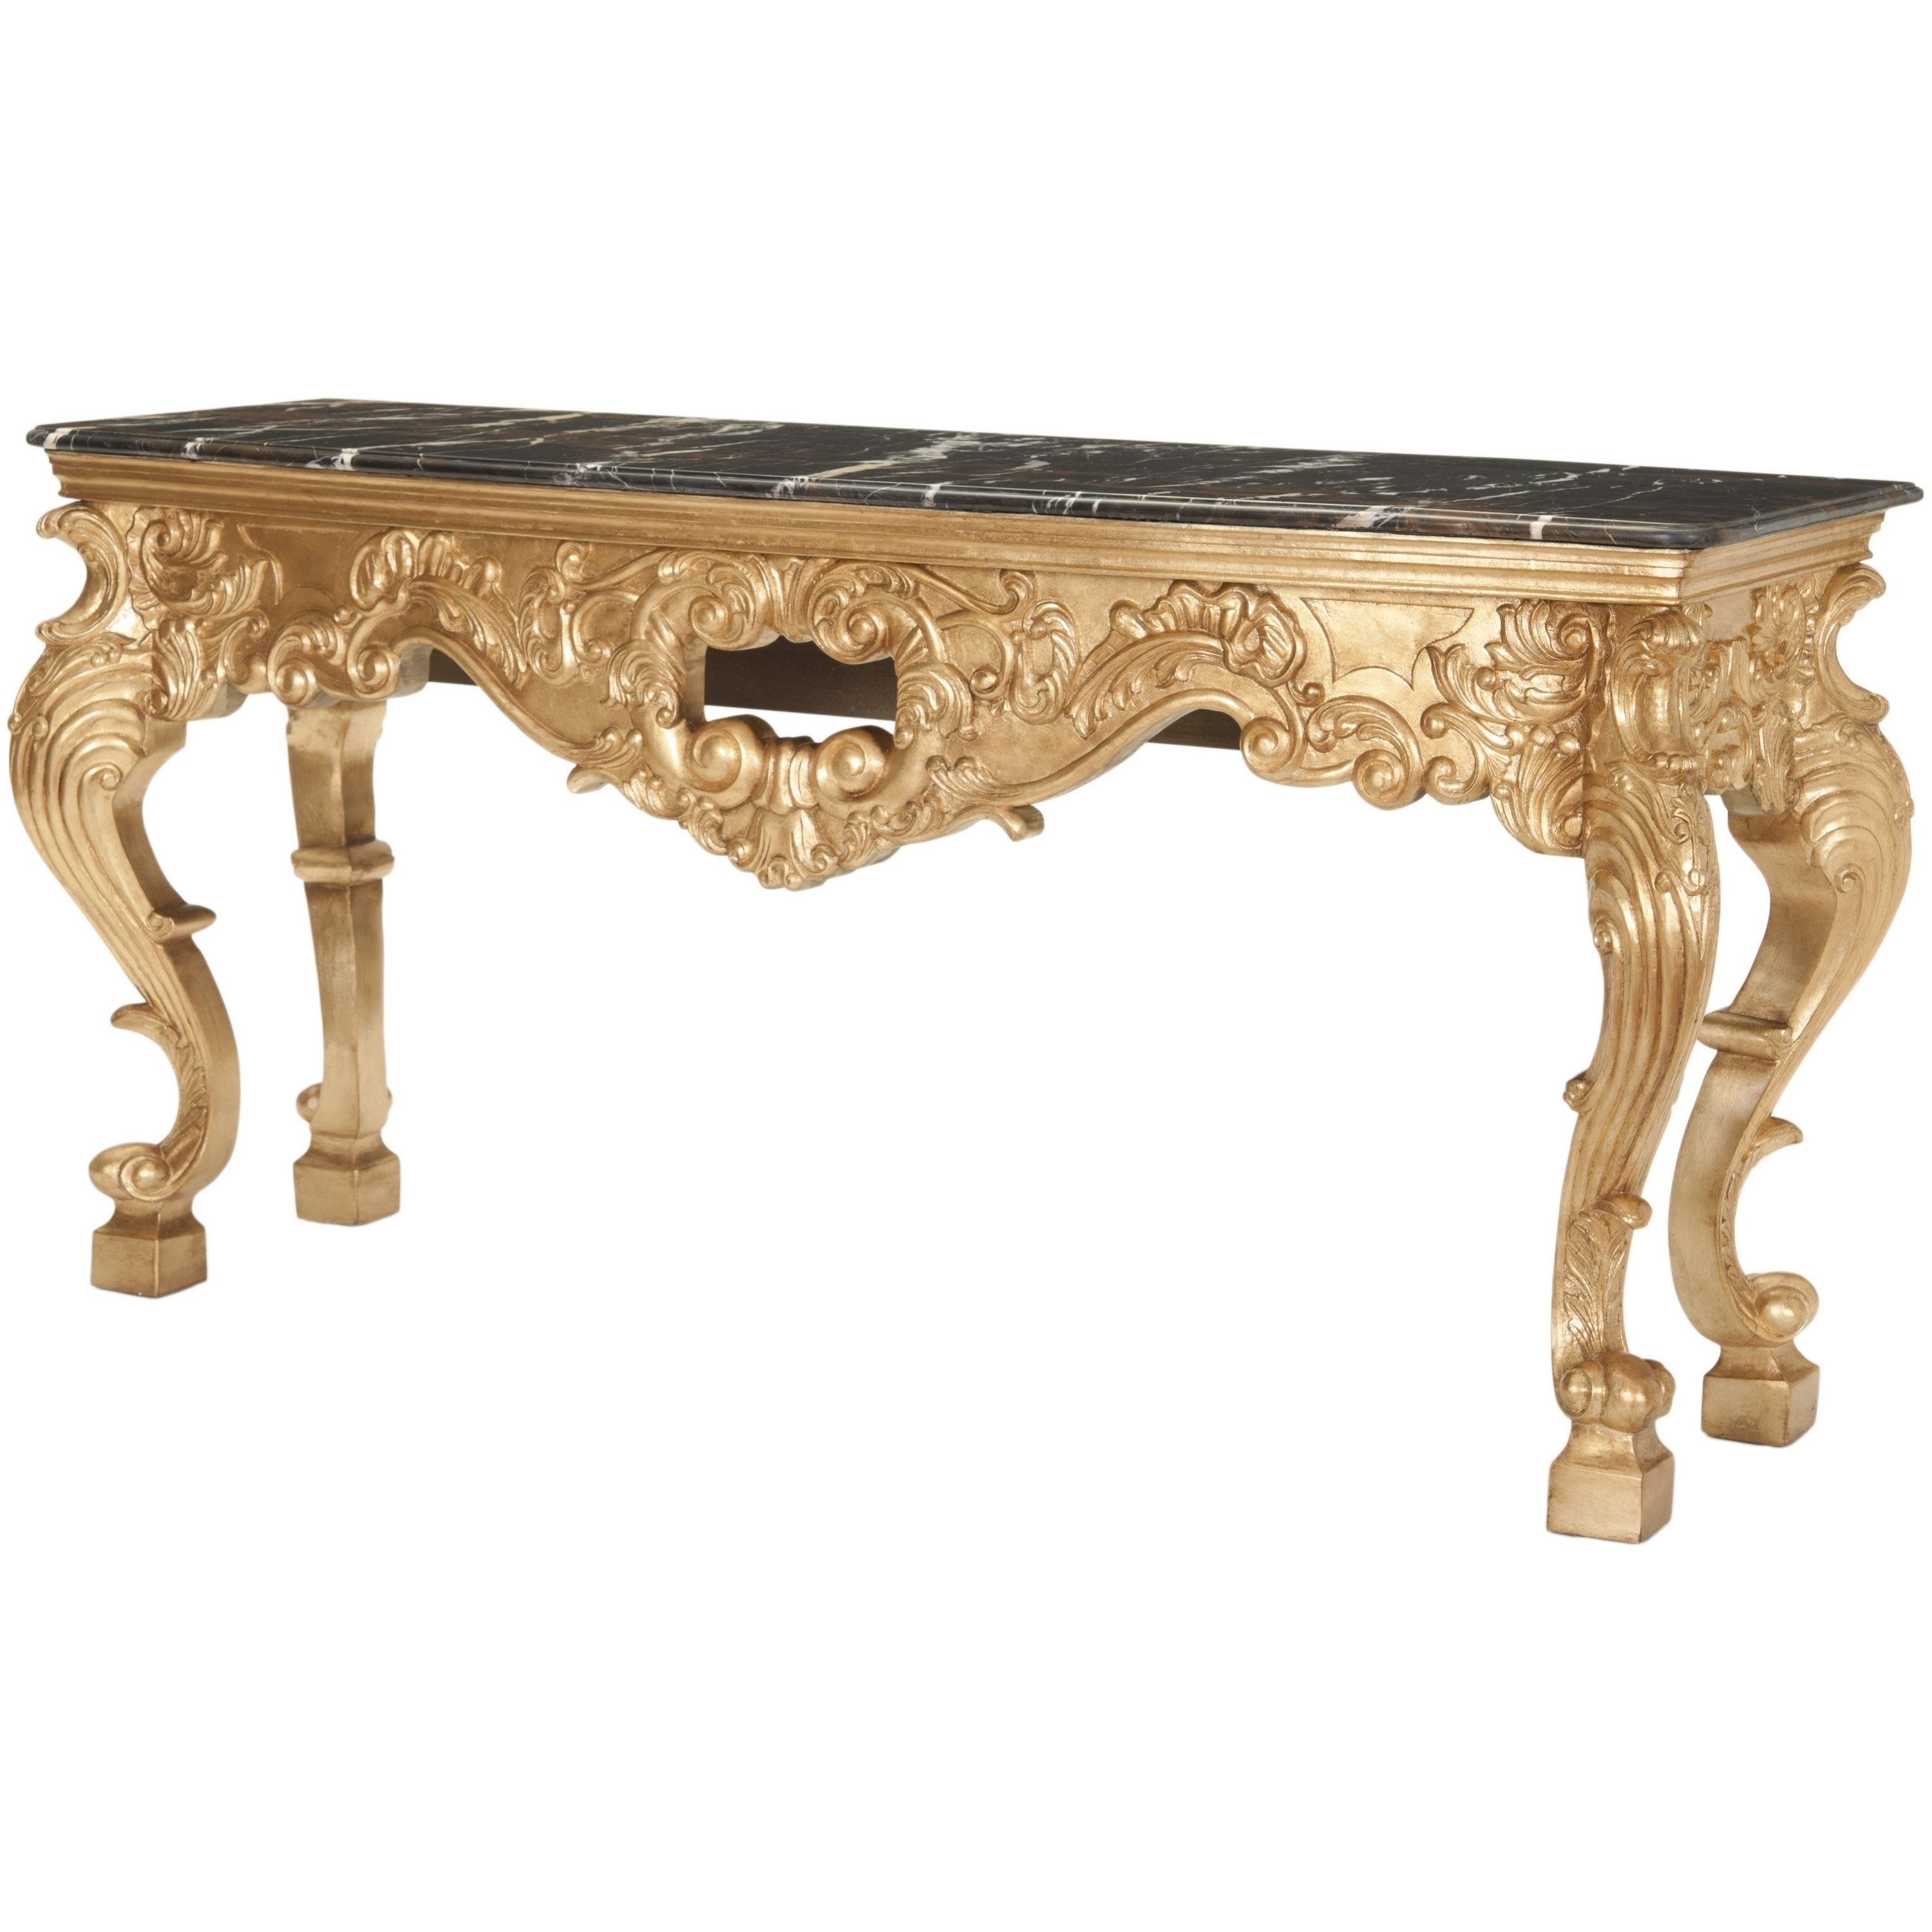 Shop Safavieh Couture High Line Collection Isadore Acacia Marble Pertaining To Most Up To Date Gold Leaf Collection Coffee Tables (View 9 of 20)